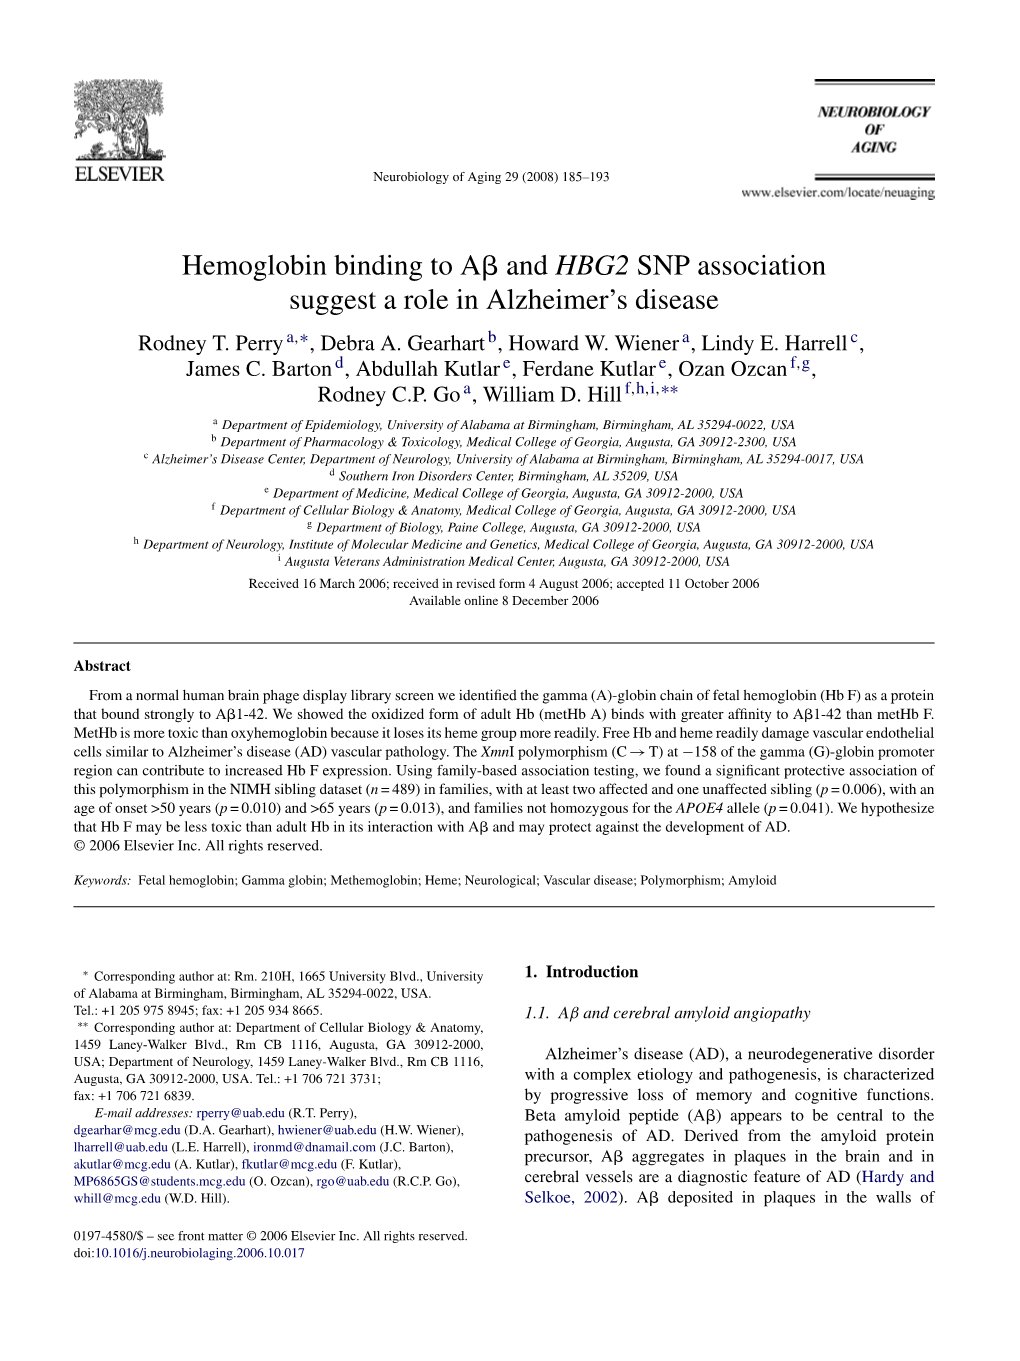 Hemoglobin Binding to Aß and HBG2 SNP Association Suggest a Role In